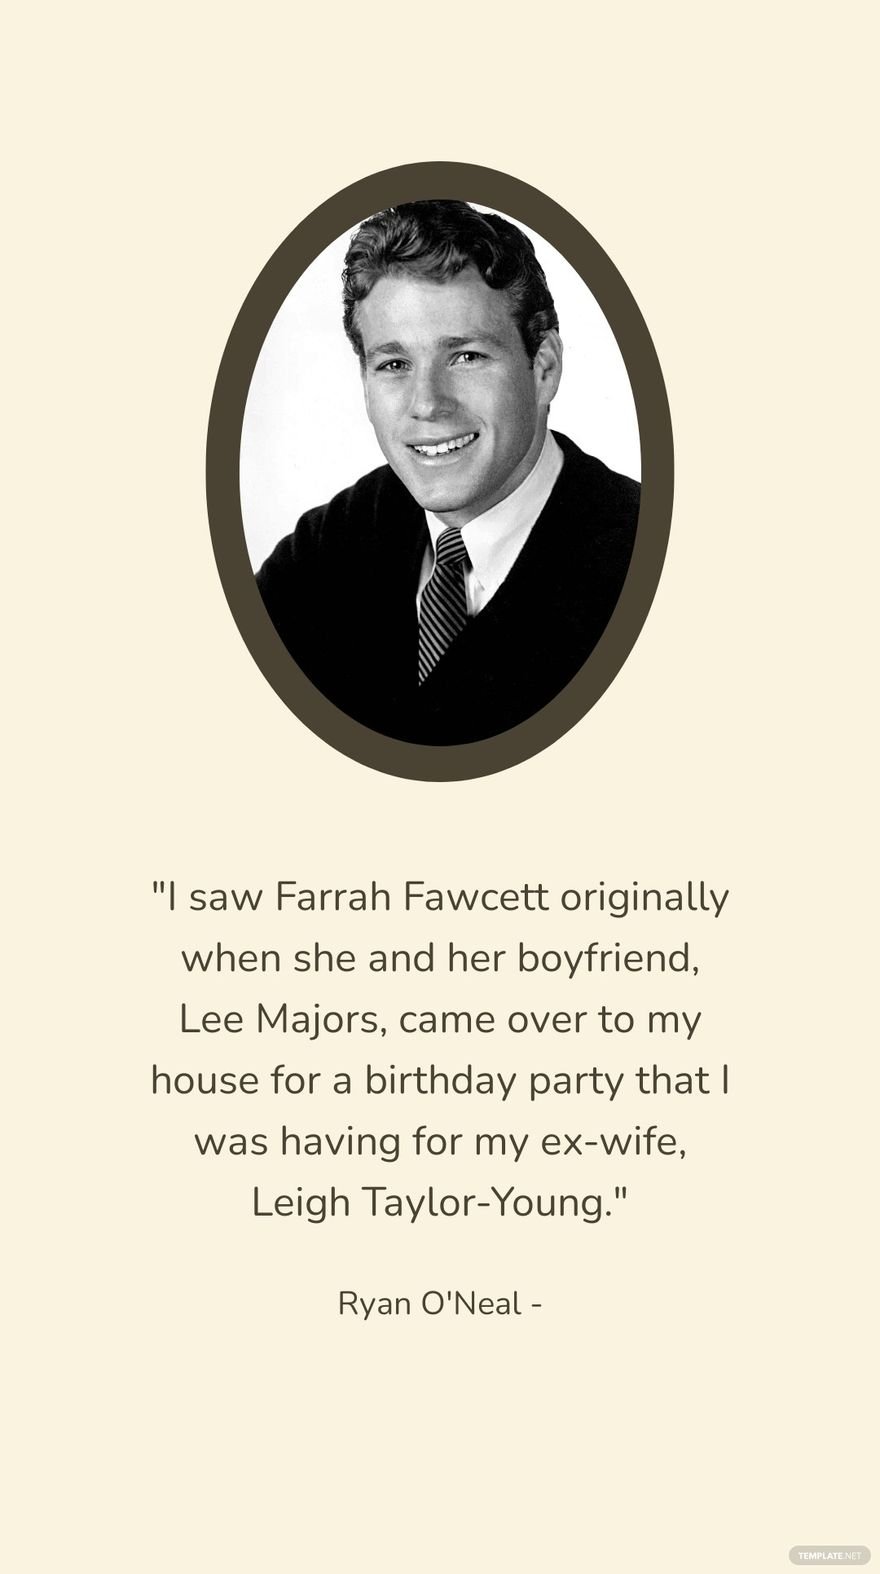 Ryan O'Neal - I saw Farrah Fawcett originally when she and her boyfriend, Lee Majors, came over to my house for a birthday party that I was having for my ex-wife, Leigh Taylor-Young.